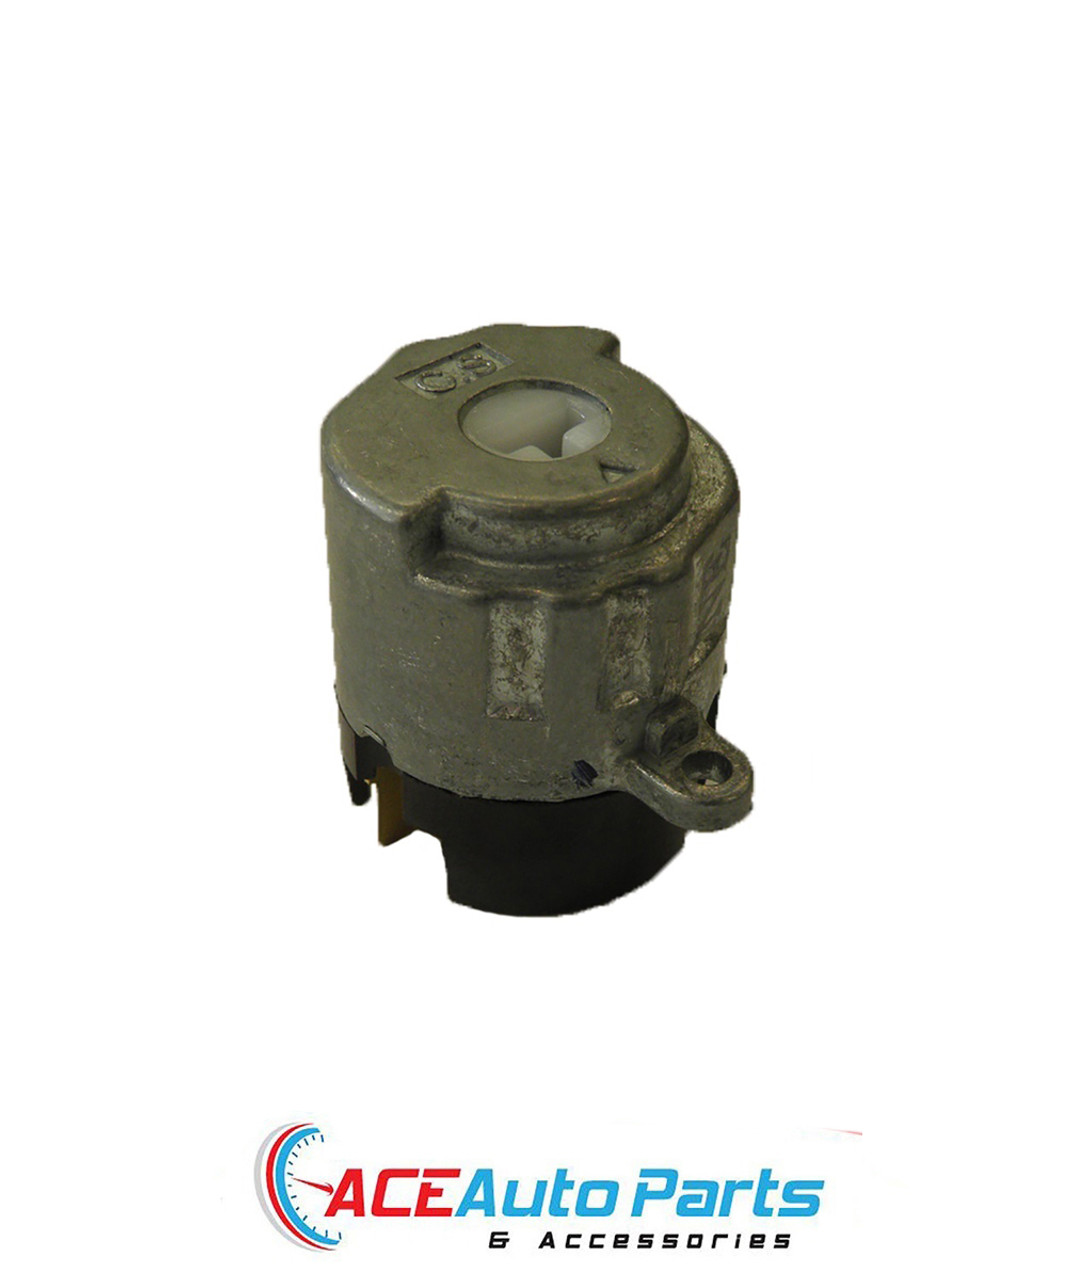 Ignition Switch For Nissan Patrol GQ + Y60